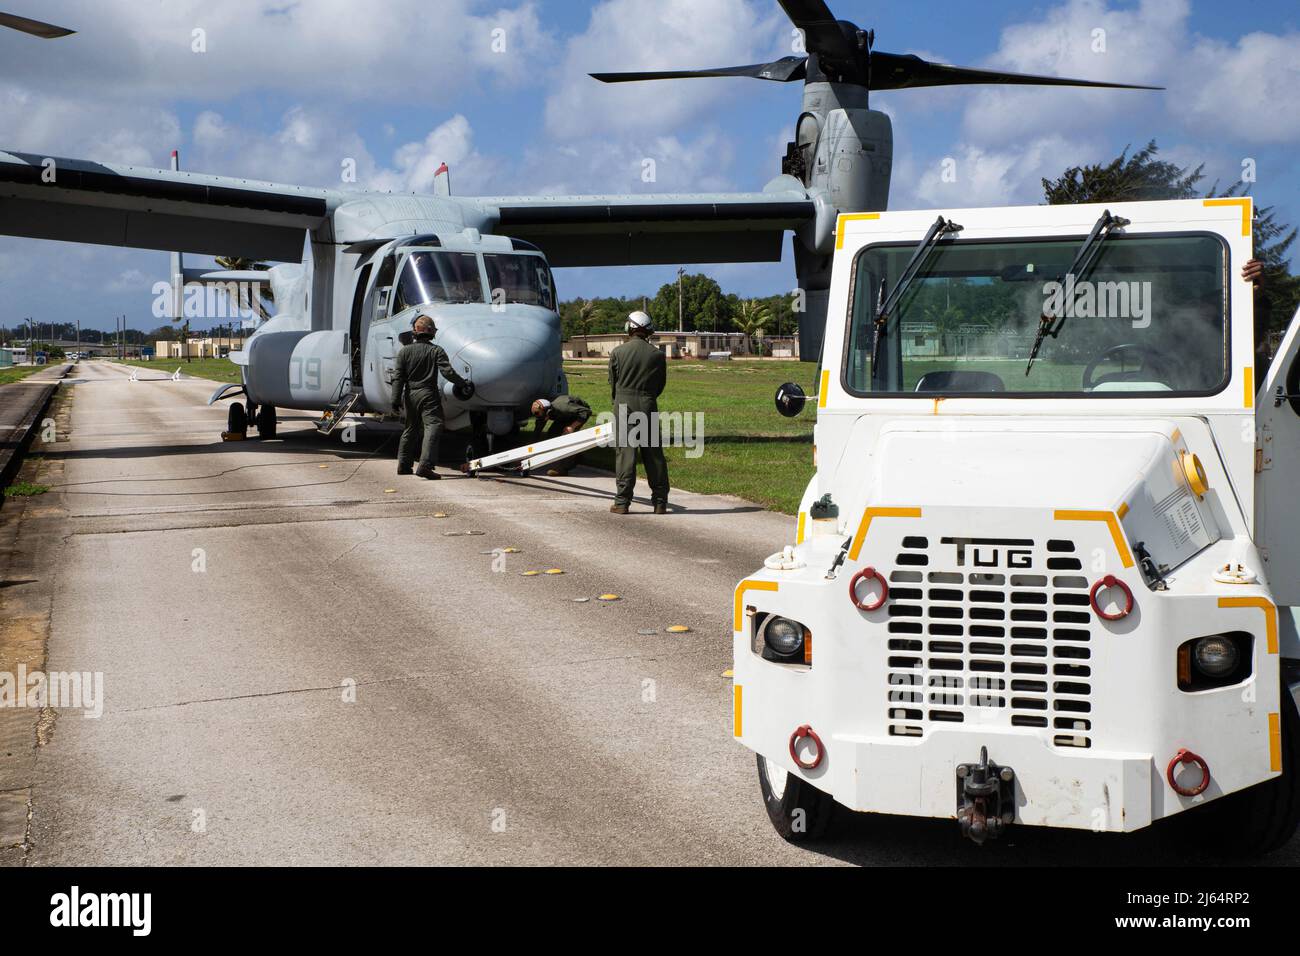 U.S. Marines with Marine Medium Tiltrotor Squadron 363, 1st Marine Aircraft Wing (MAW), prepare to move an MV-22 Osprey after landing at Naval Base Guam, April 24, 2022. 1st MAW serves as the Aviation Combat Element of the III Marine Expeditionary Force headquartered on the island of Okinawa, Japan and provides support to the Indo-Pacific area. (U.S. Marine Corps photo by Gunnery Sgt. Rubin J. Tan) Stock Photo